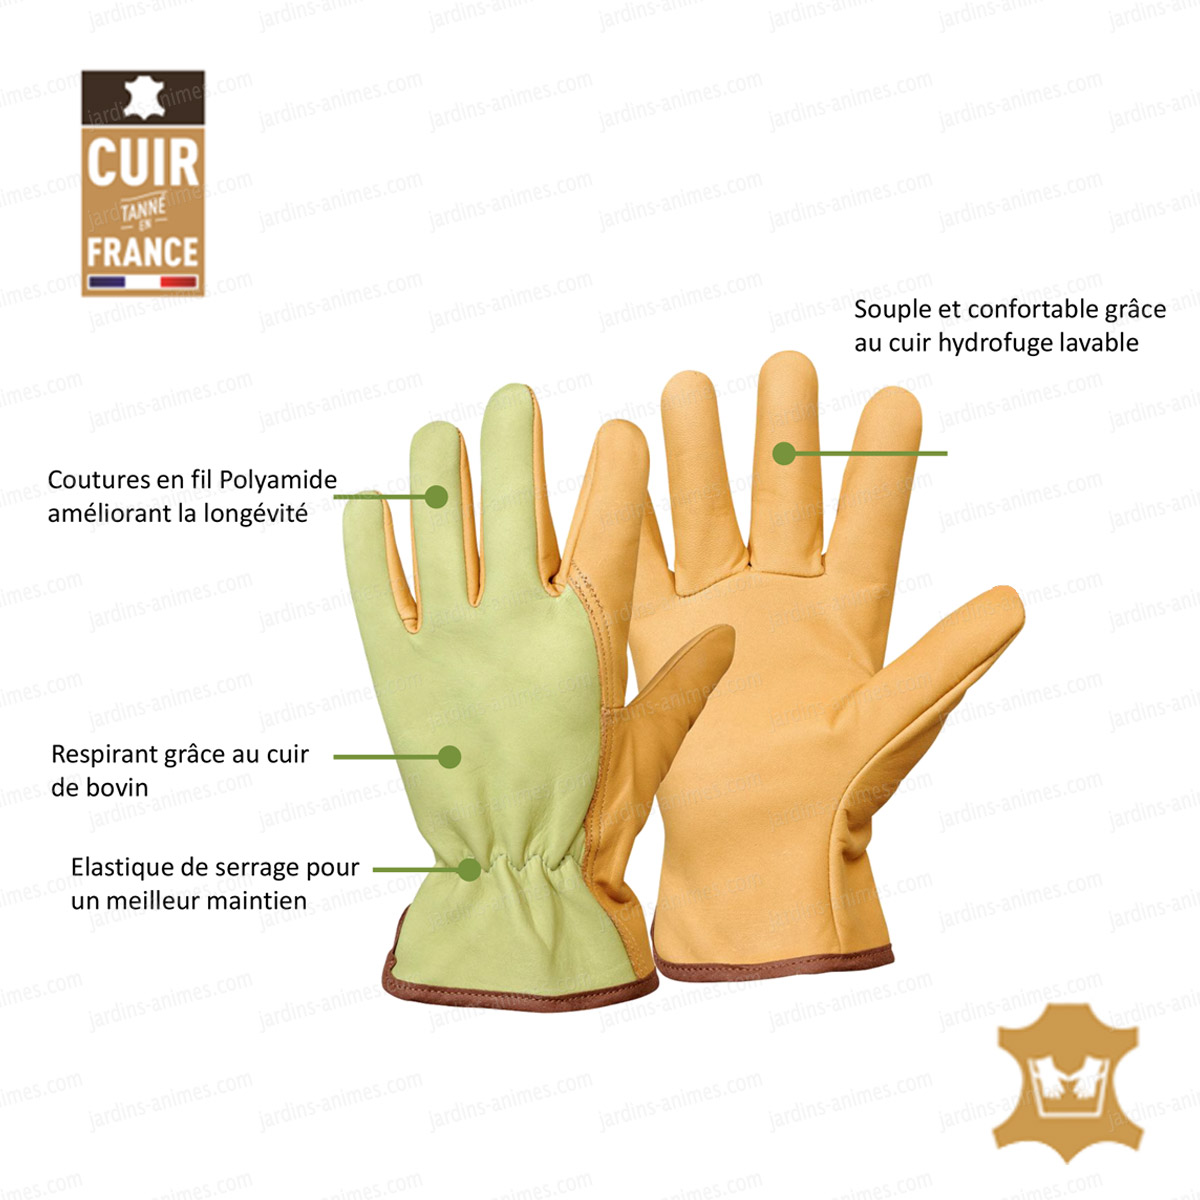 Gants de jardinage 100% cuir Frenchie ROSTAING Taille 07 